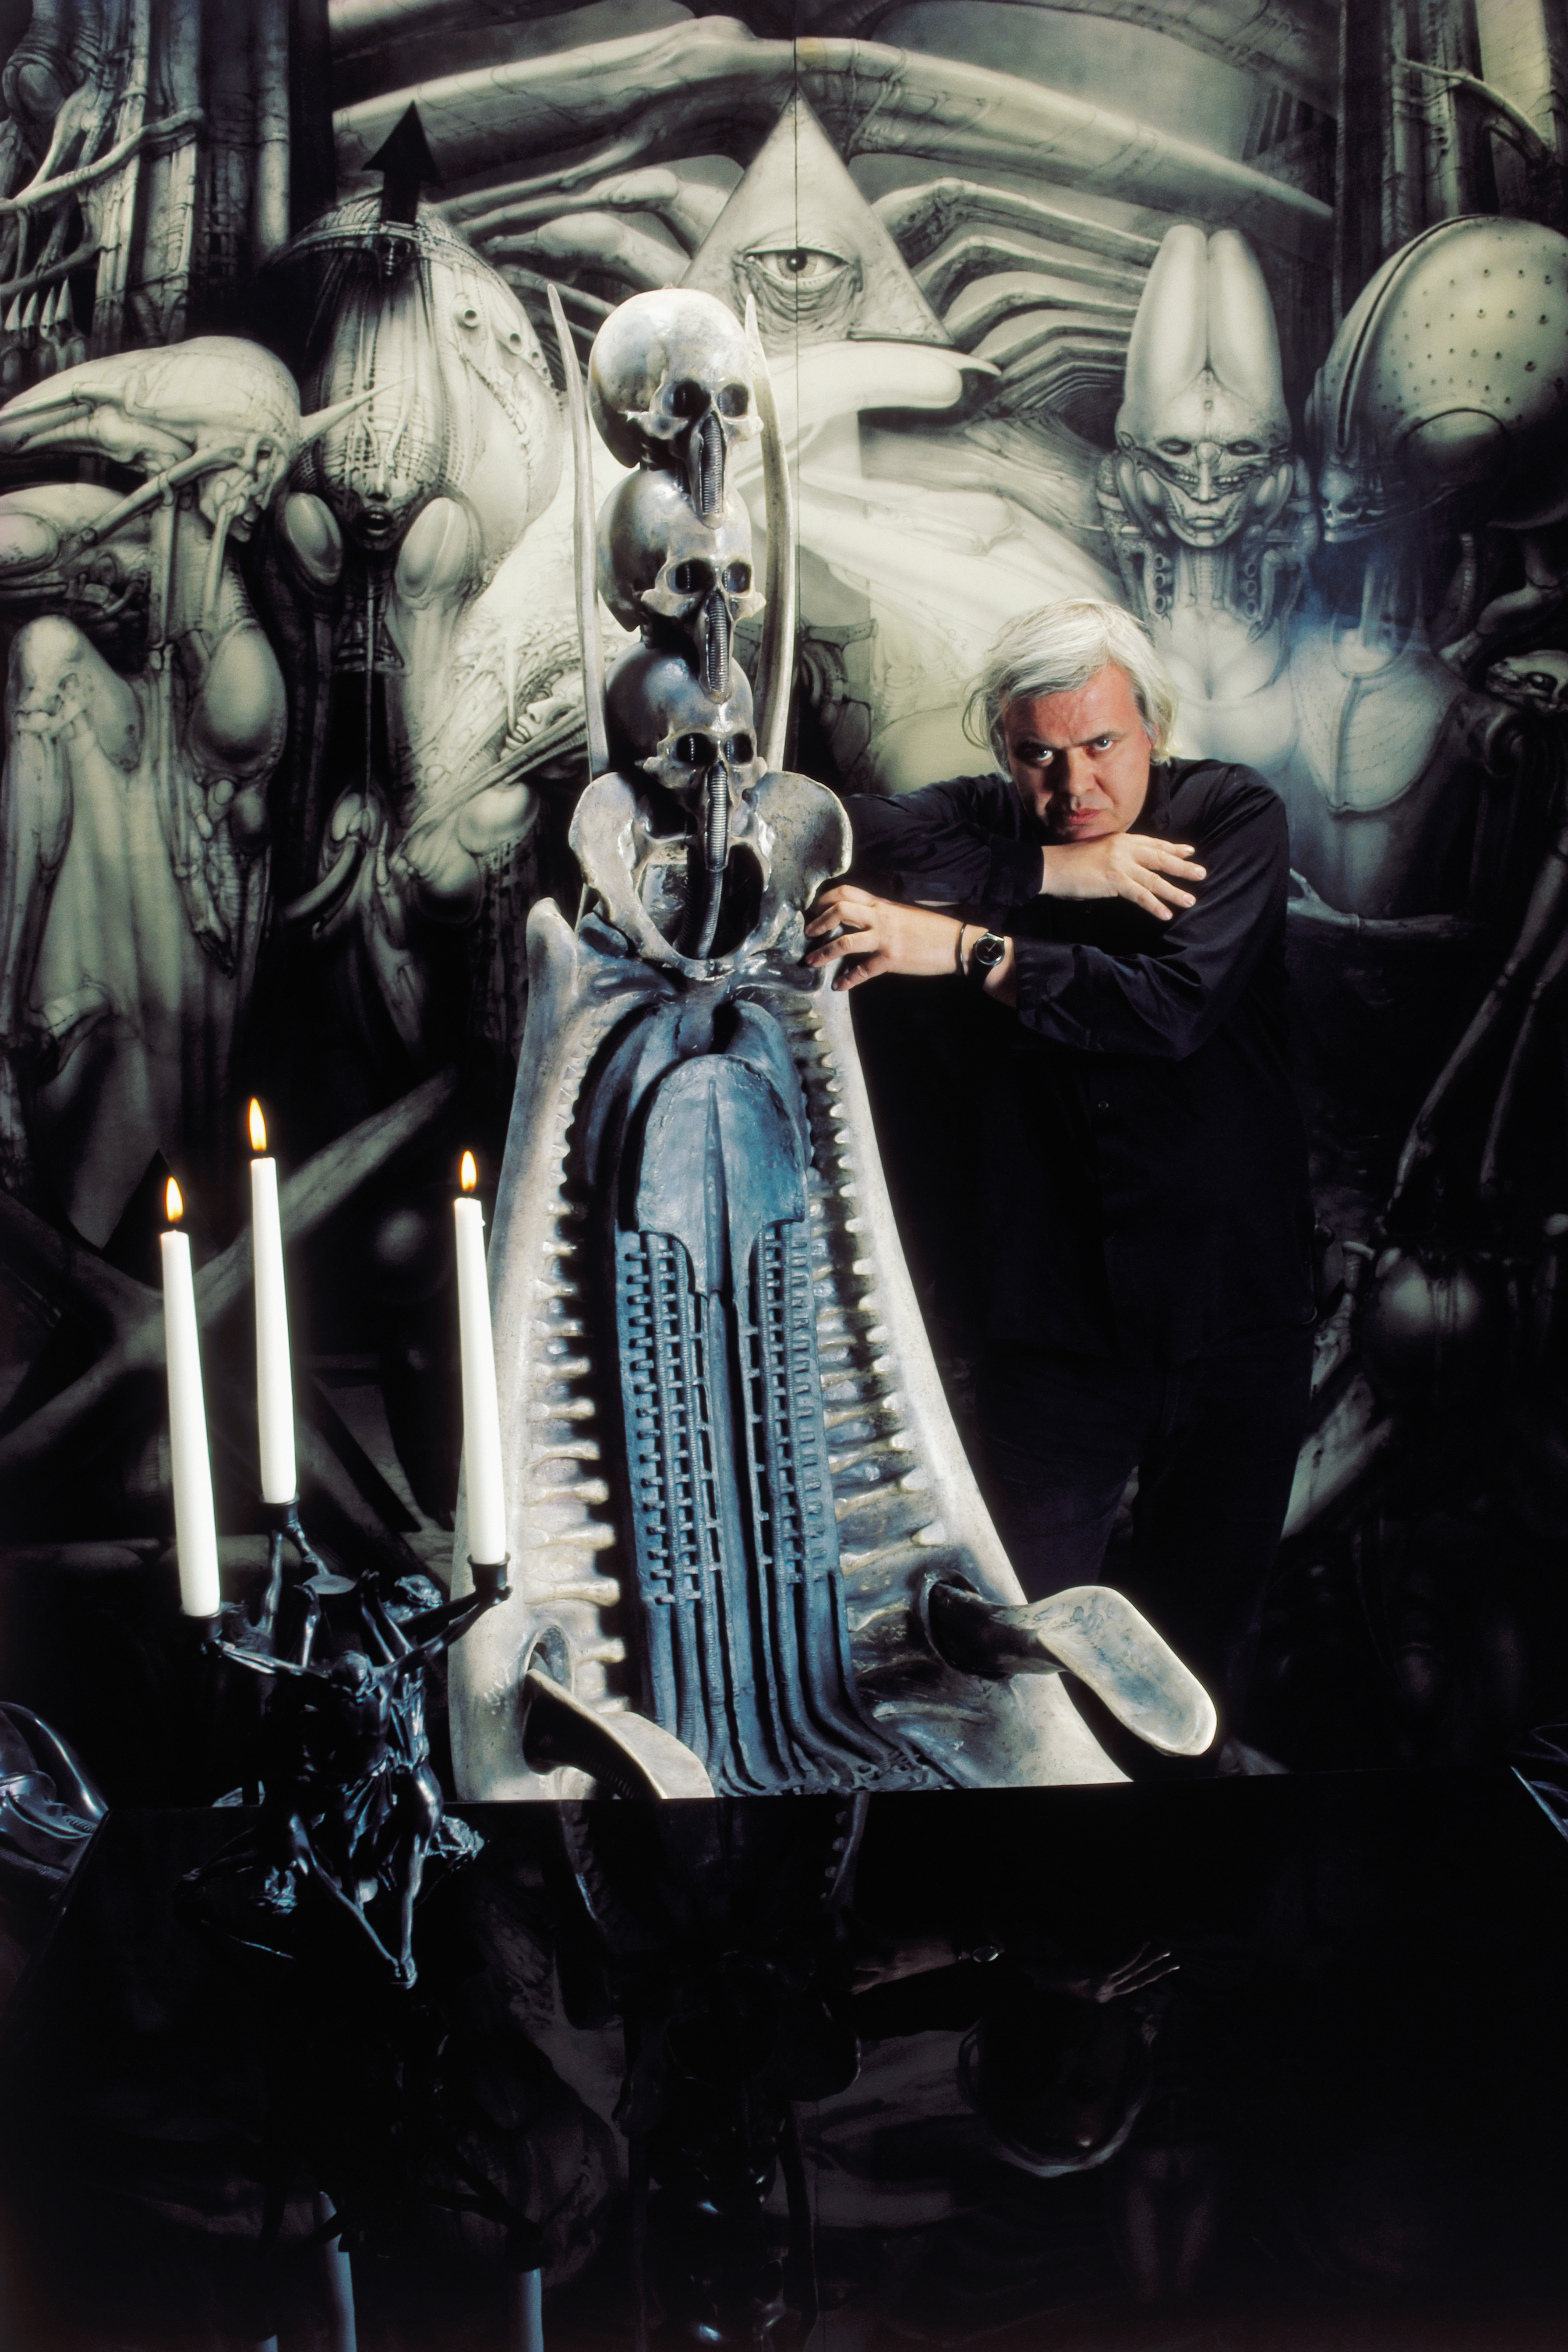 Giger may be best known for his design of the  Alien  movie monster.